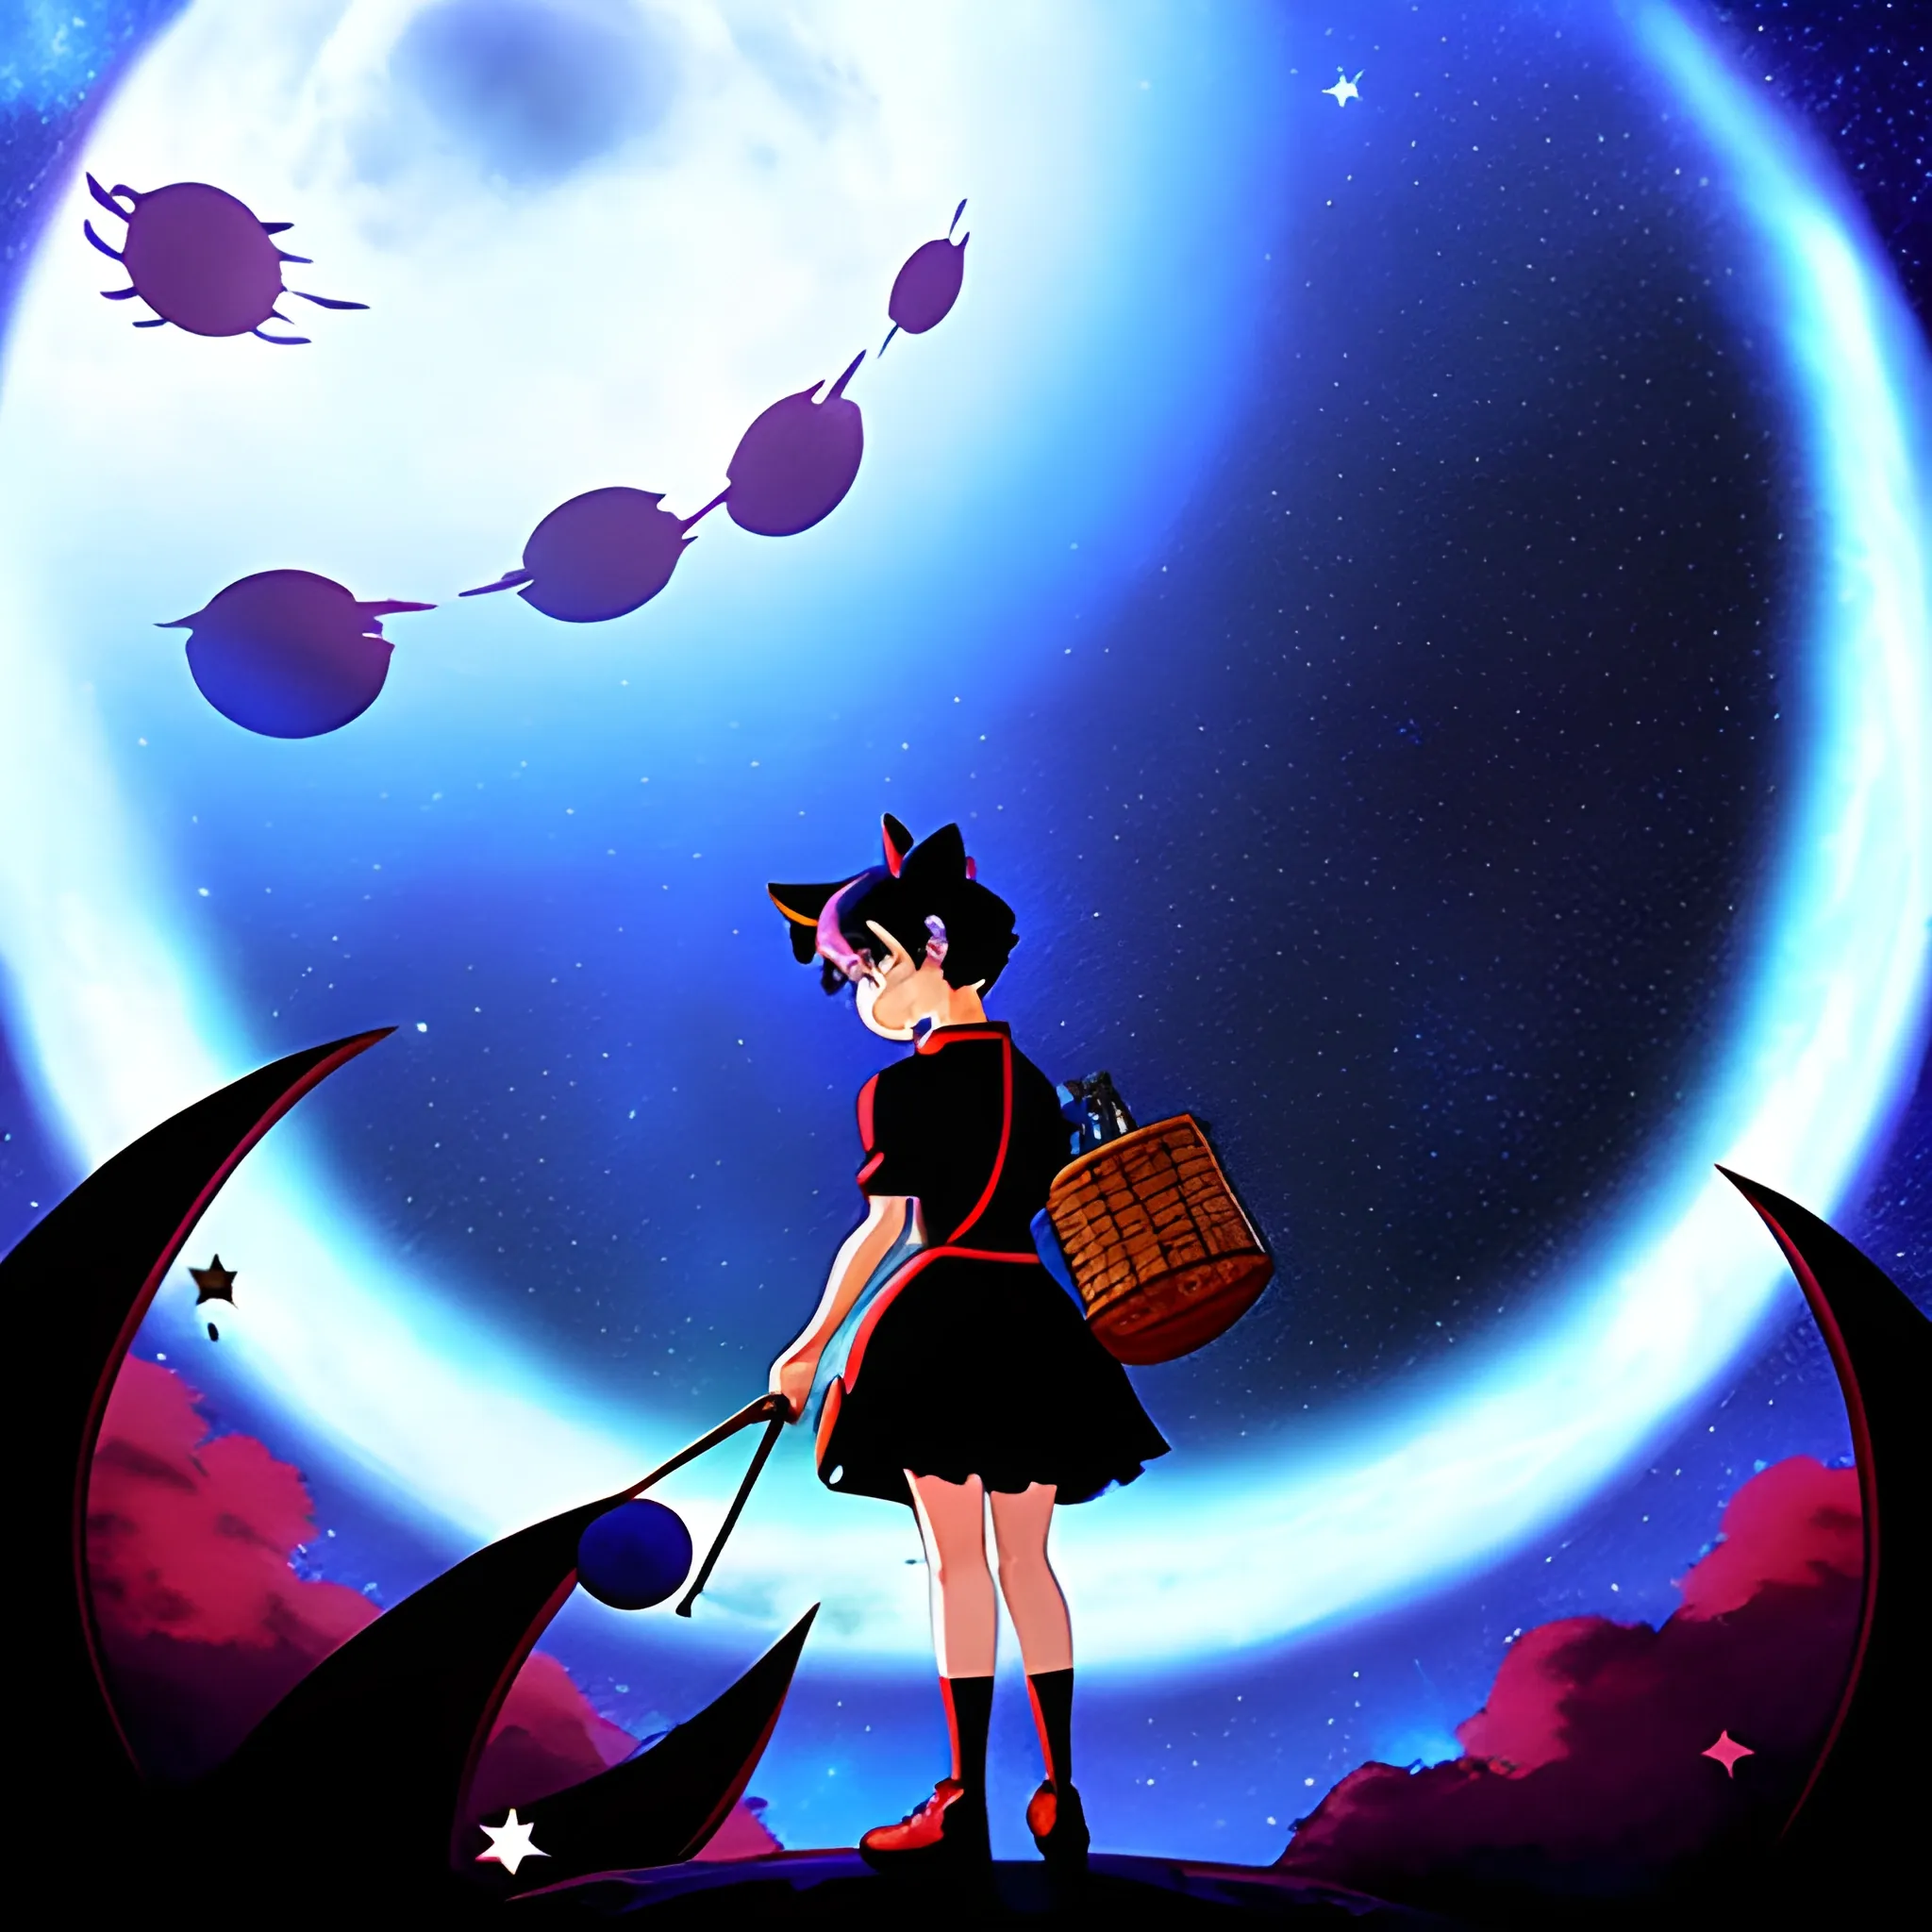 Kiki's delivery service in space galaxy stardust Moon fantasy anime